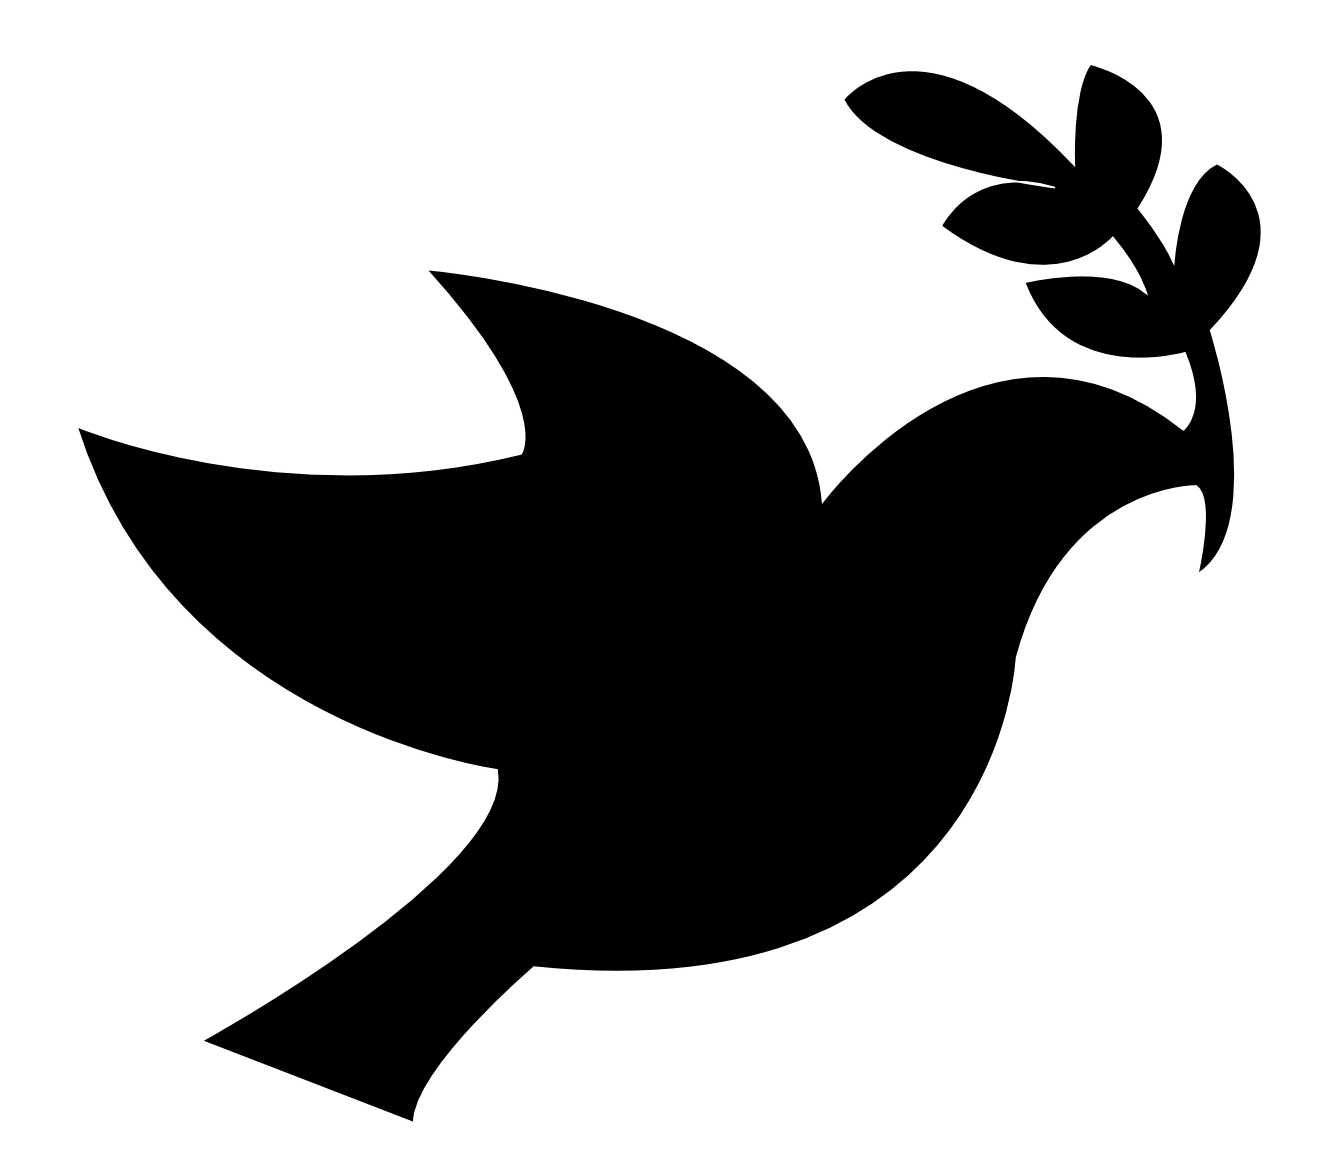 Pigeon clipart pigeon peace.  collection of high